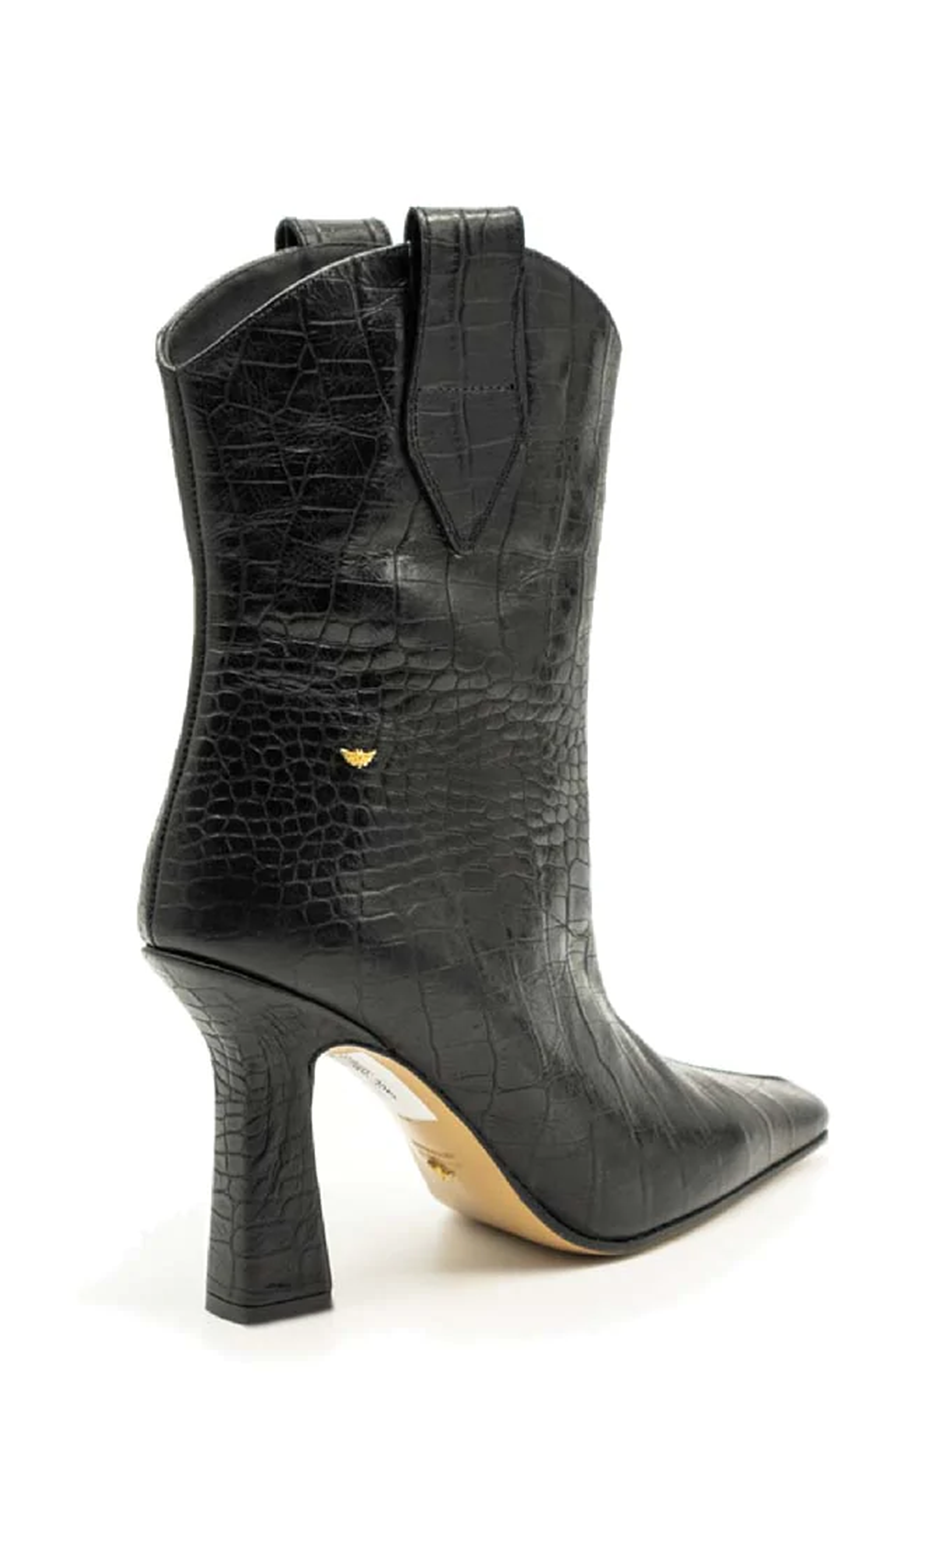 miguel vieira crocodile pattern leather boots